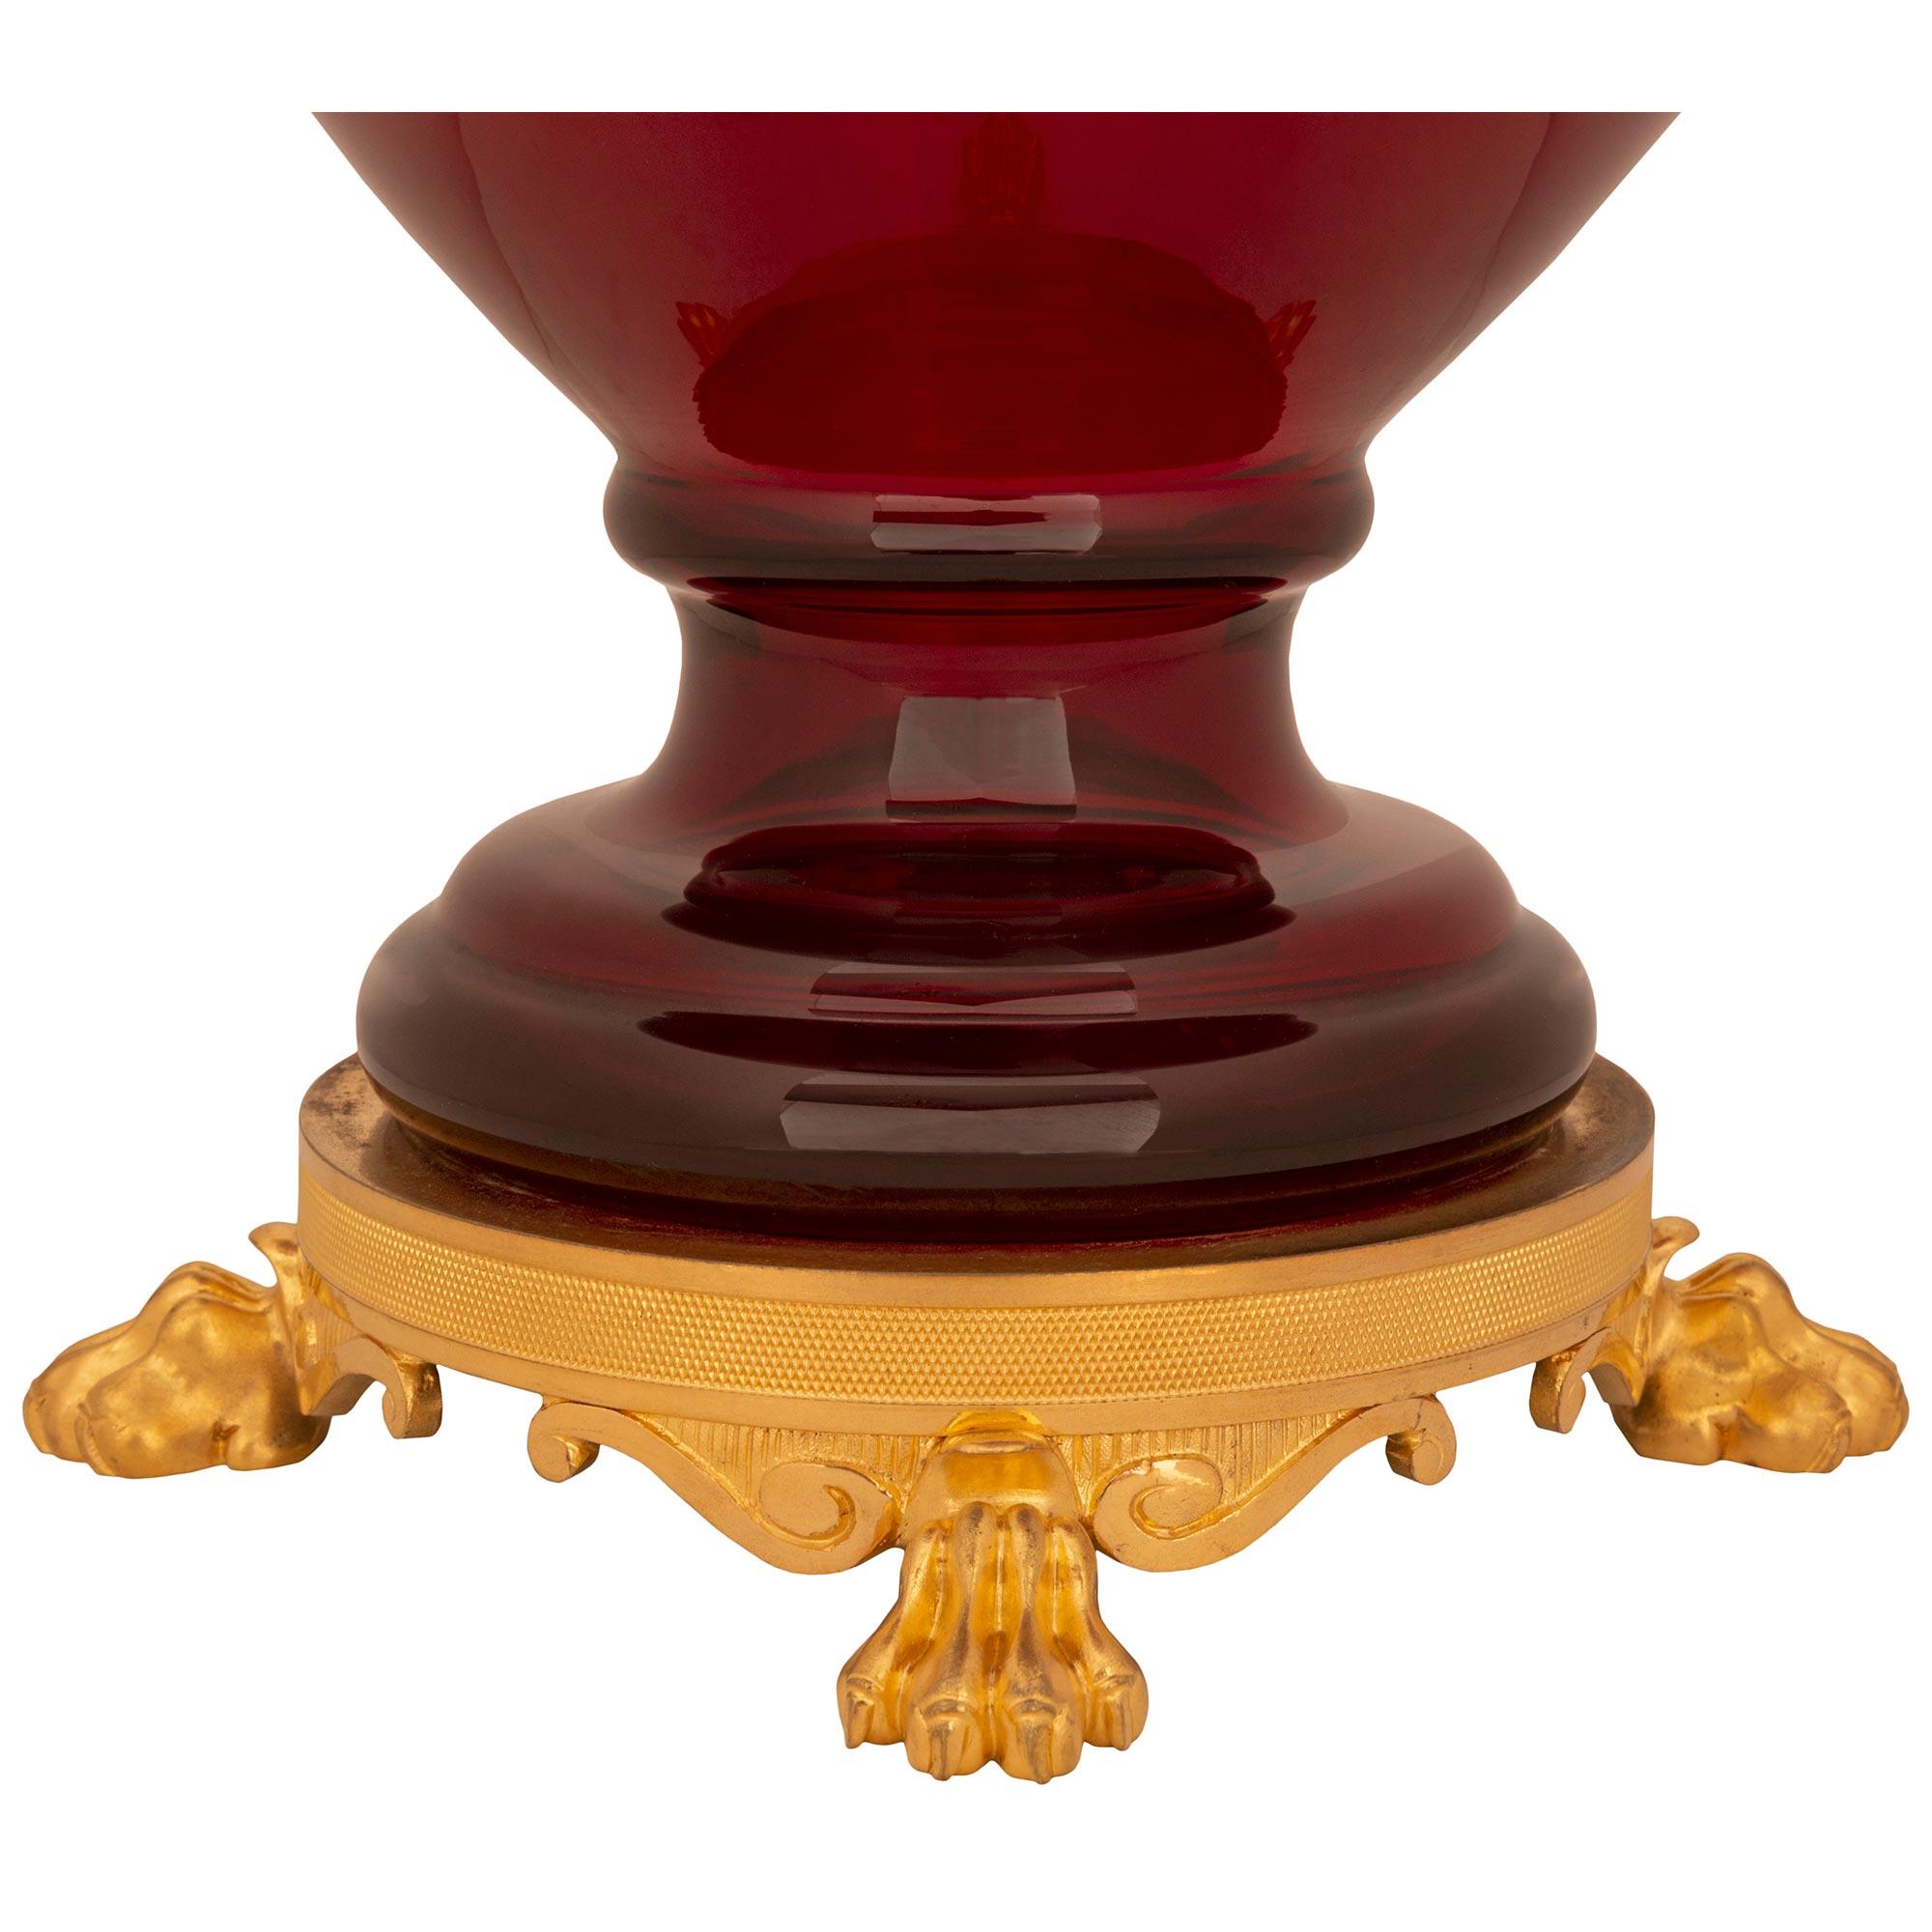 French 19th Century Neo-Classical St. Oxblood Red Glass and Ormolu Lidded Urn For Sale 5